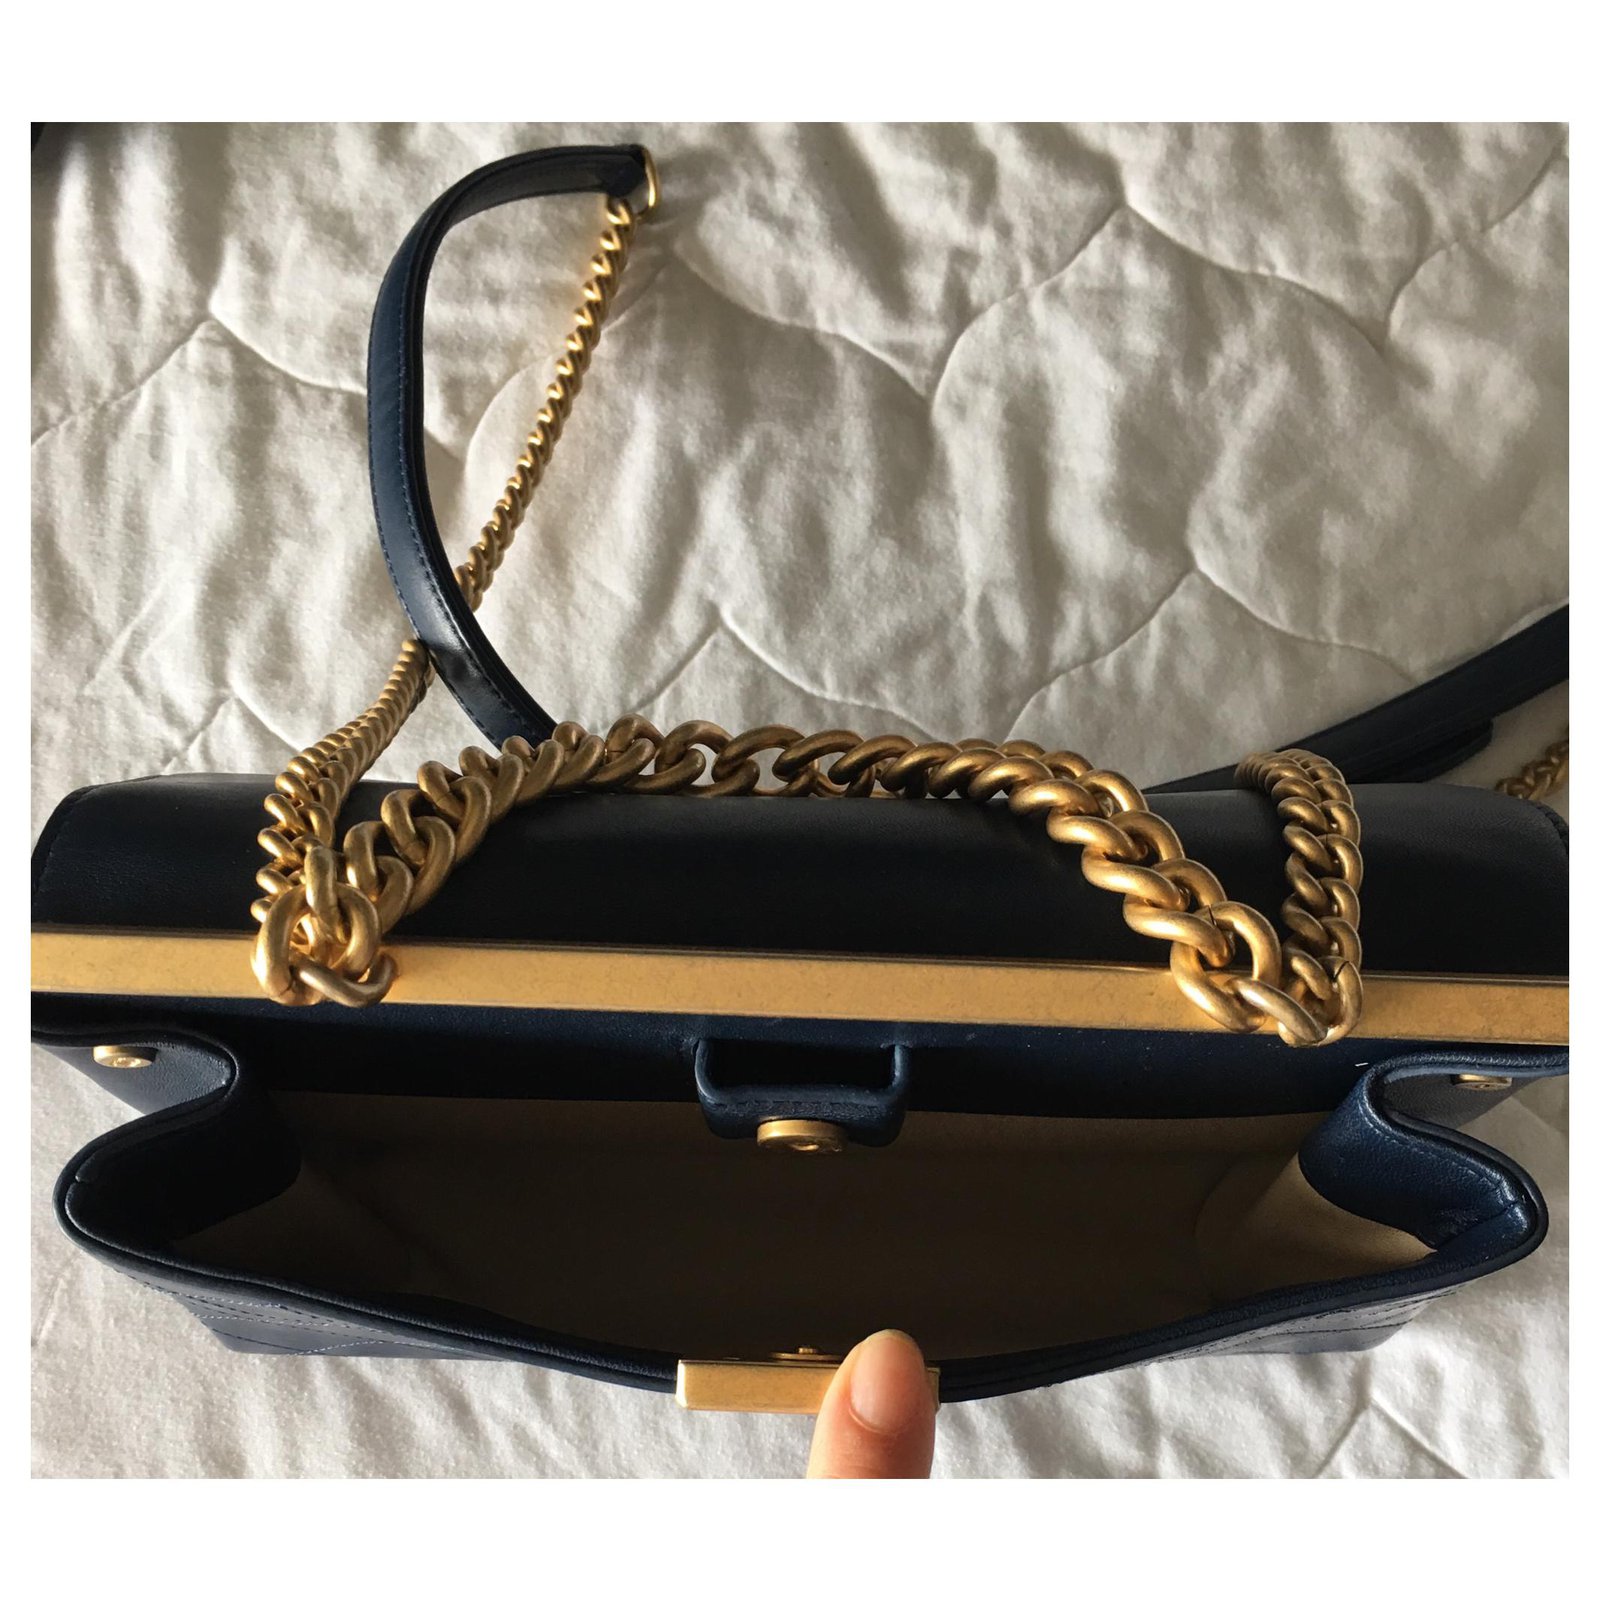 Chanel Coco Luxe Bag